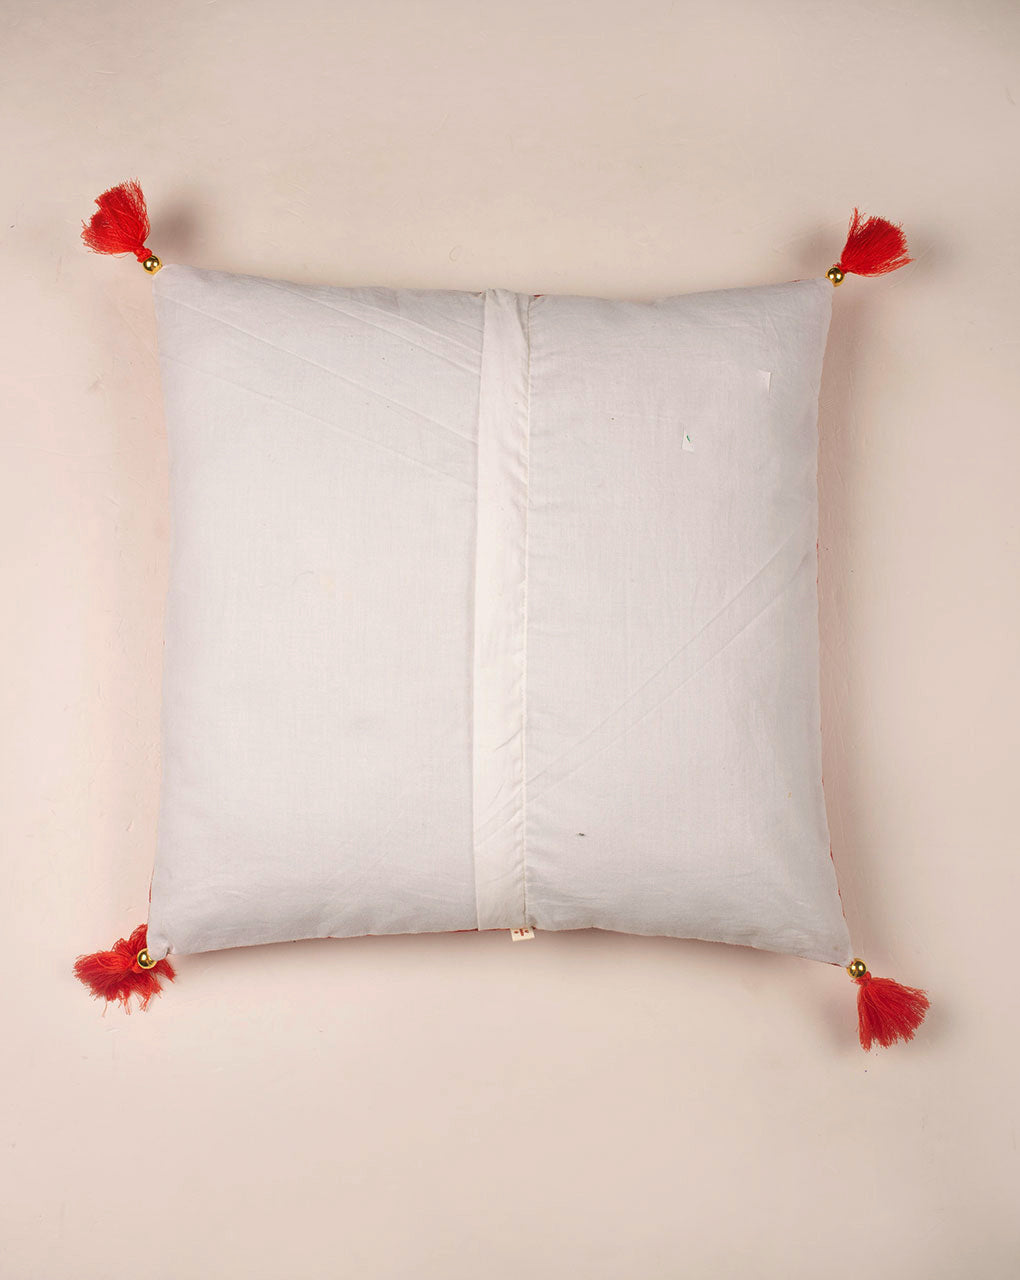 Hand Crafted Cotton Cushion Cover ( 16X16 Inches ) - Fabriclore.com